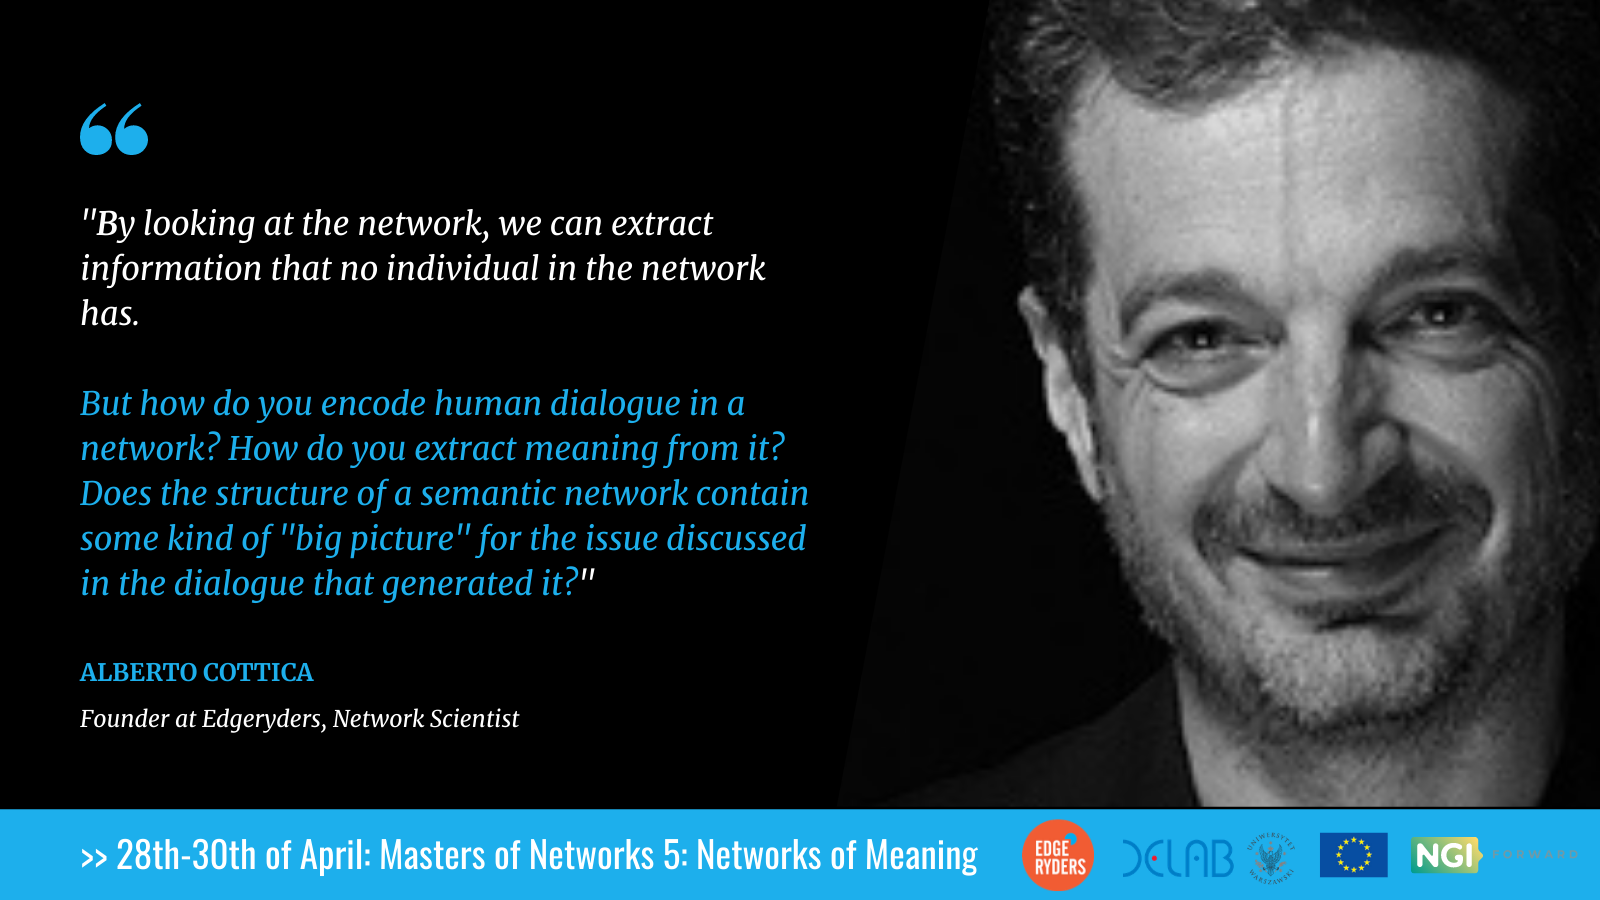 For master of networks